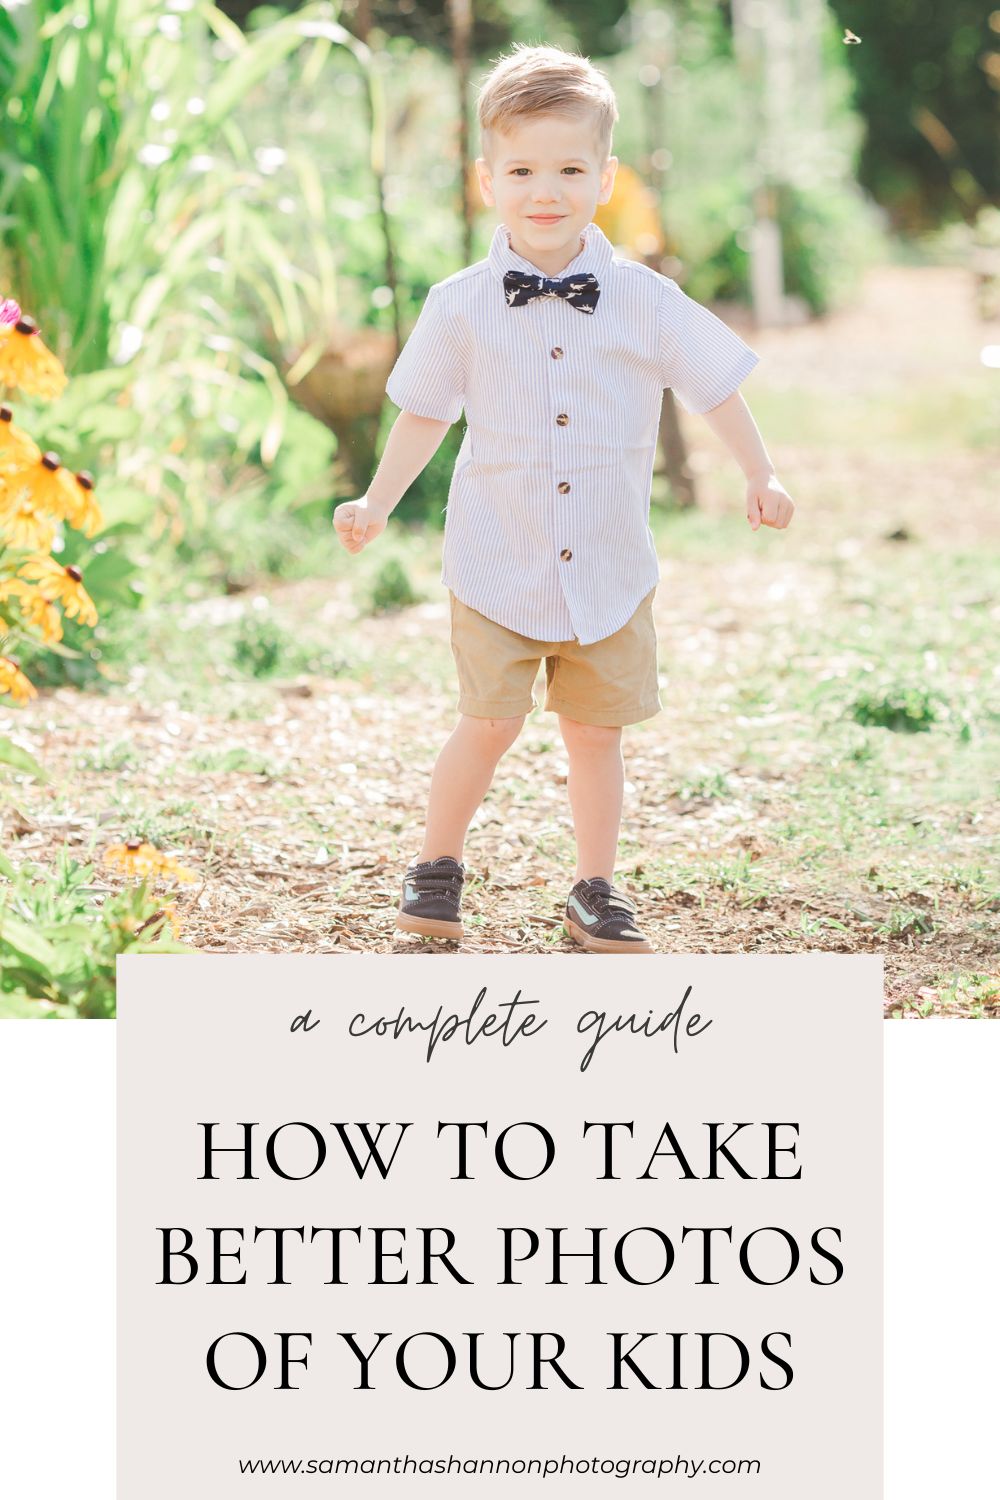 5 Essential Tips to Take Better Photos of Your Kids